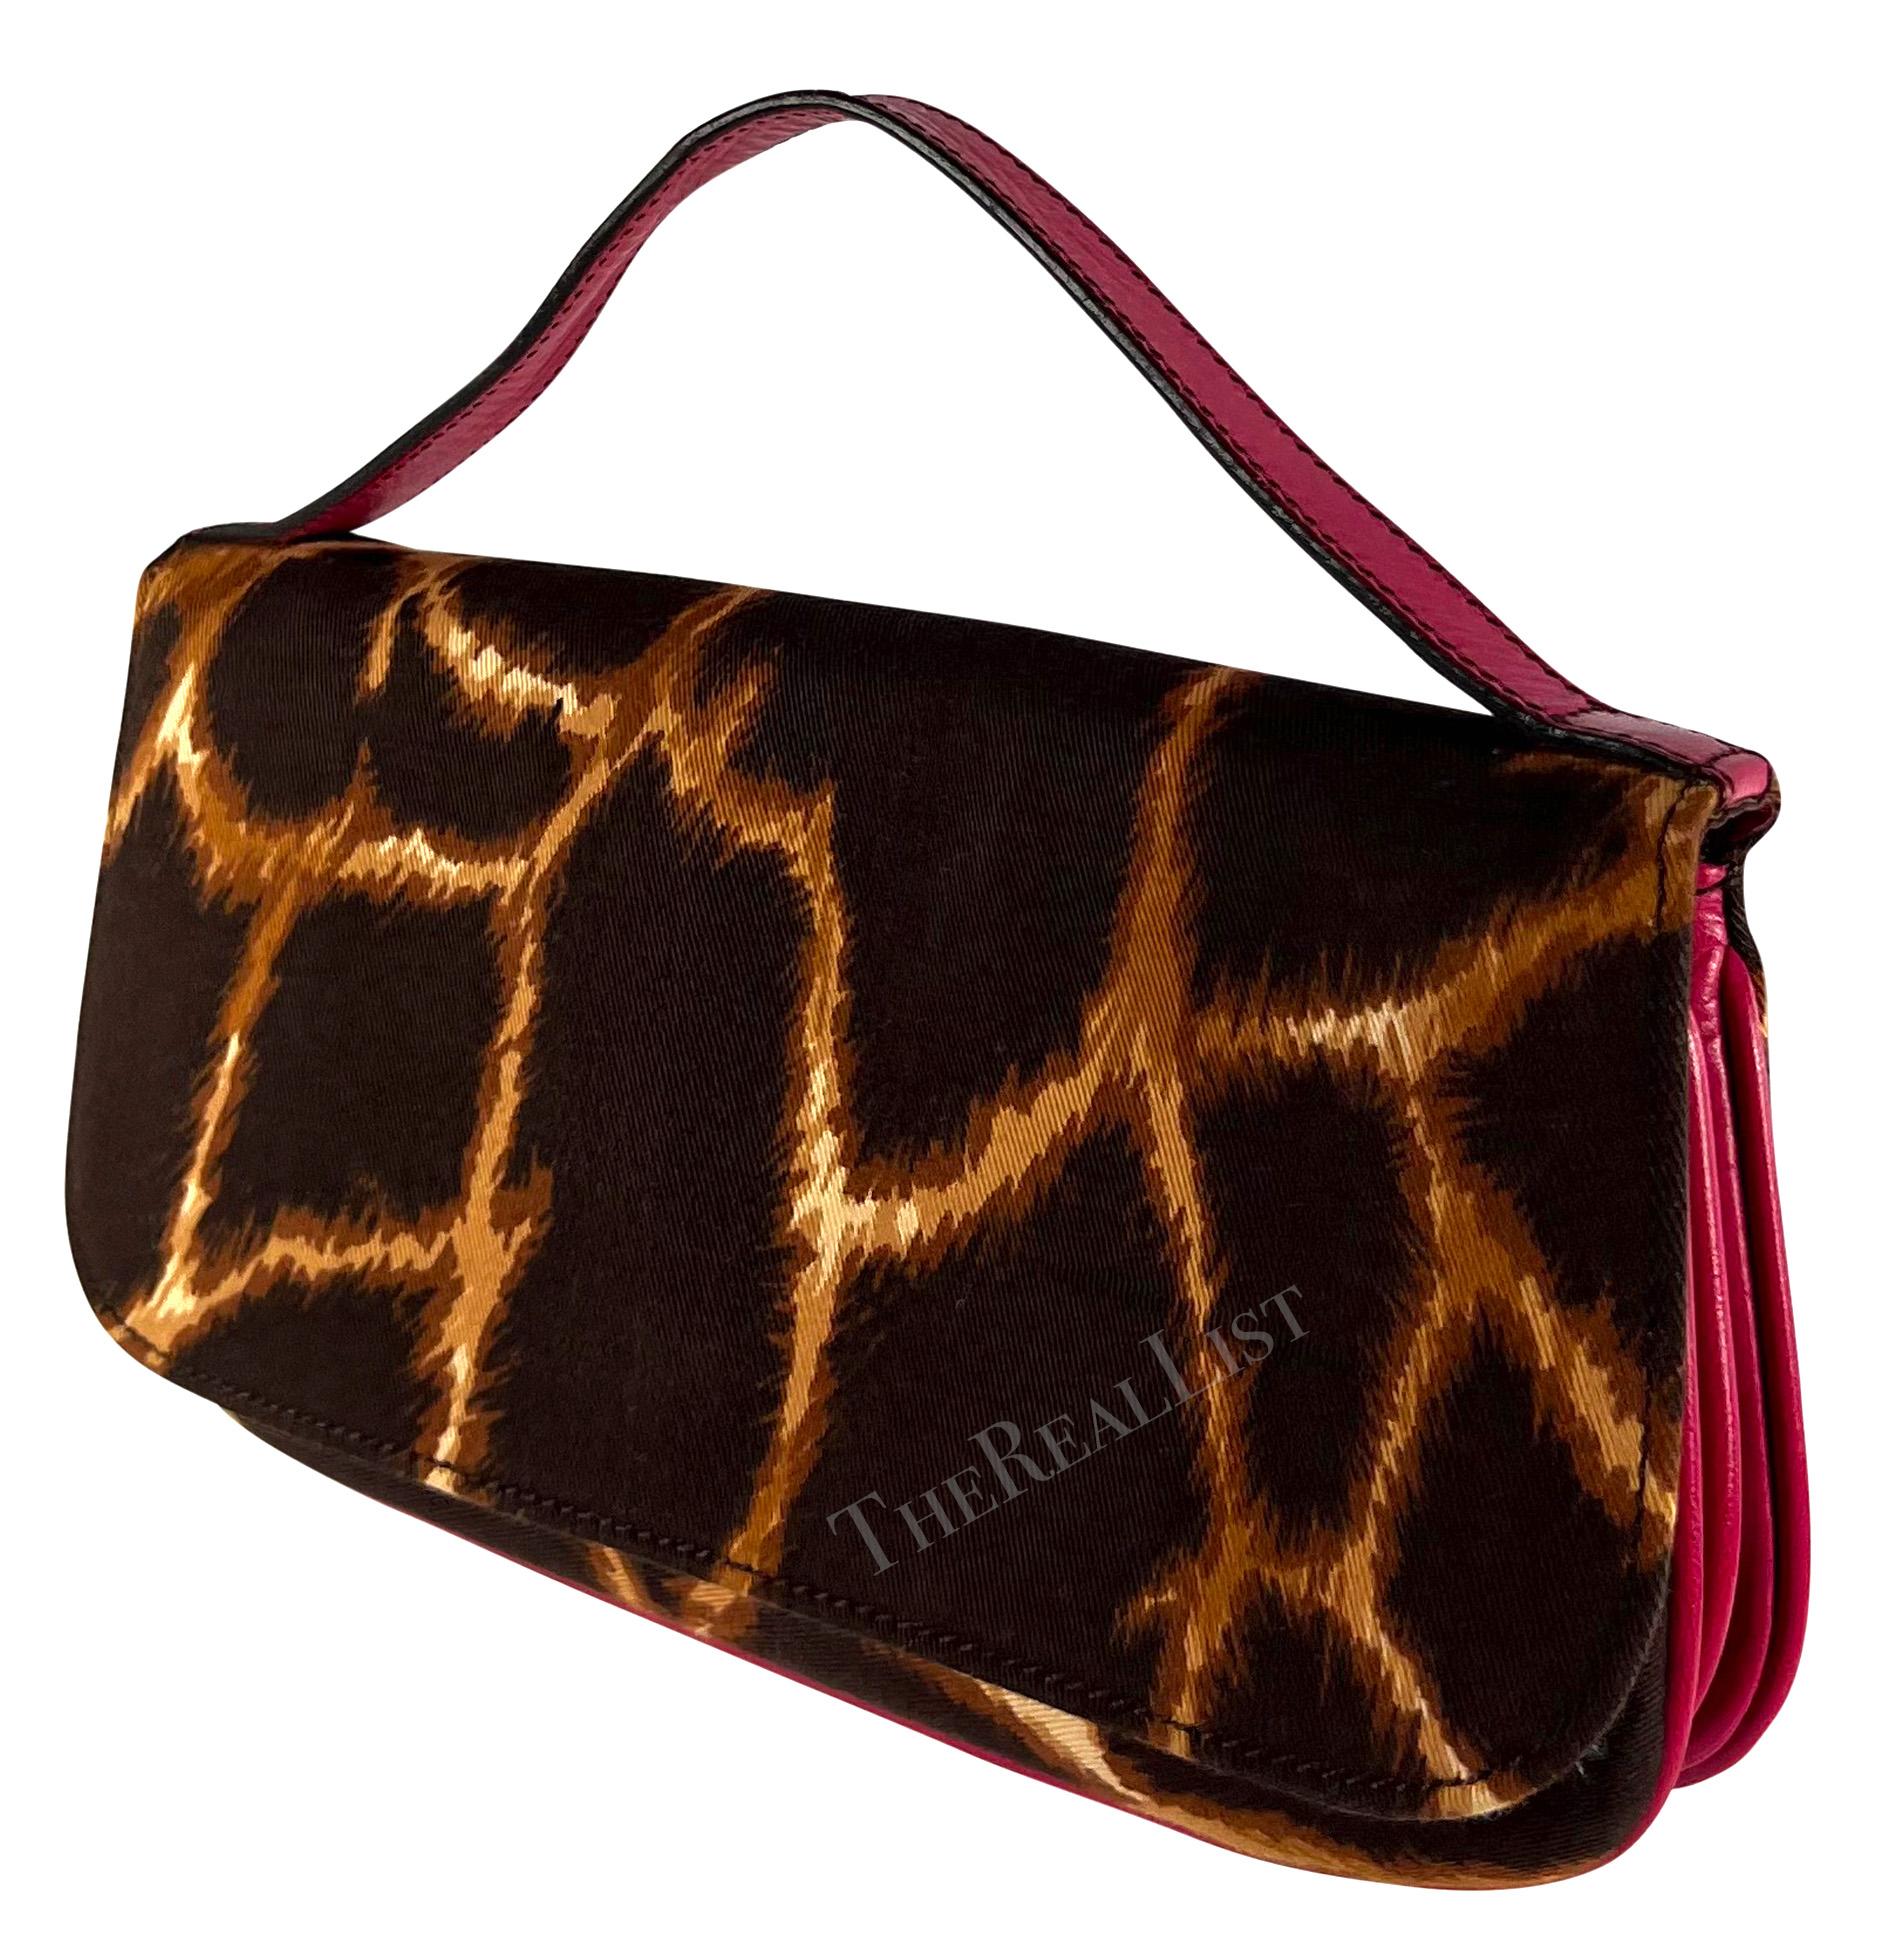 From the early 2000s, this fabulous giraffe print Dolce & Gabbana canvas clutch bag features a flap secured with a magnetic closure and is complete with a hot pink leather handle embossed with the brand's signature.

Approximate